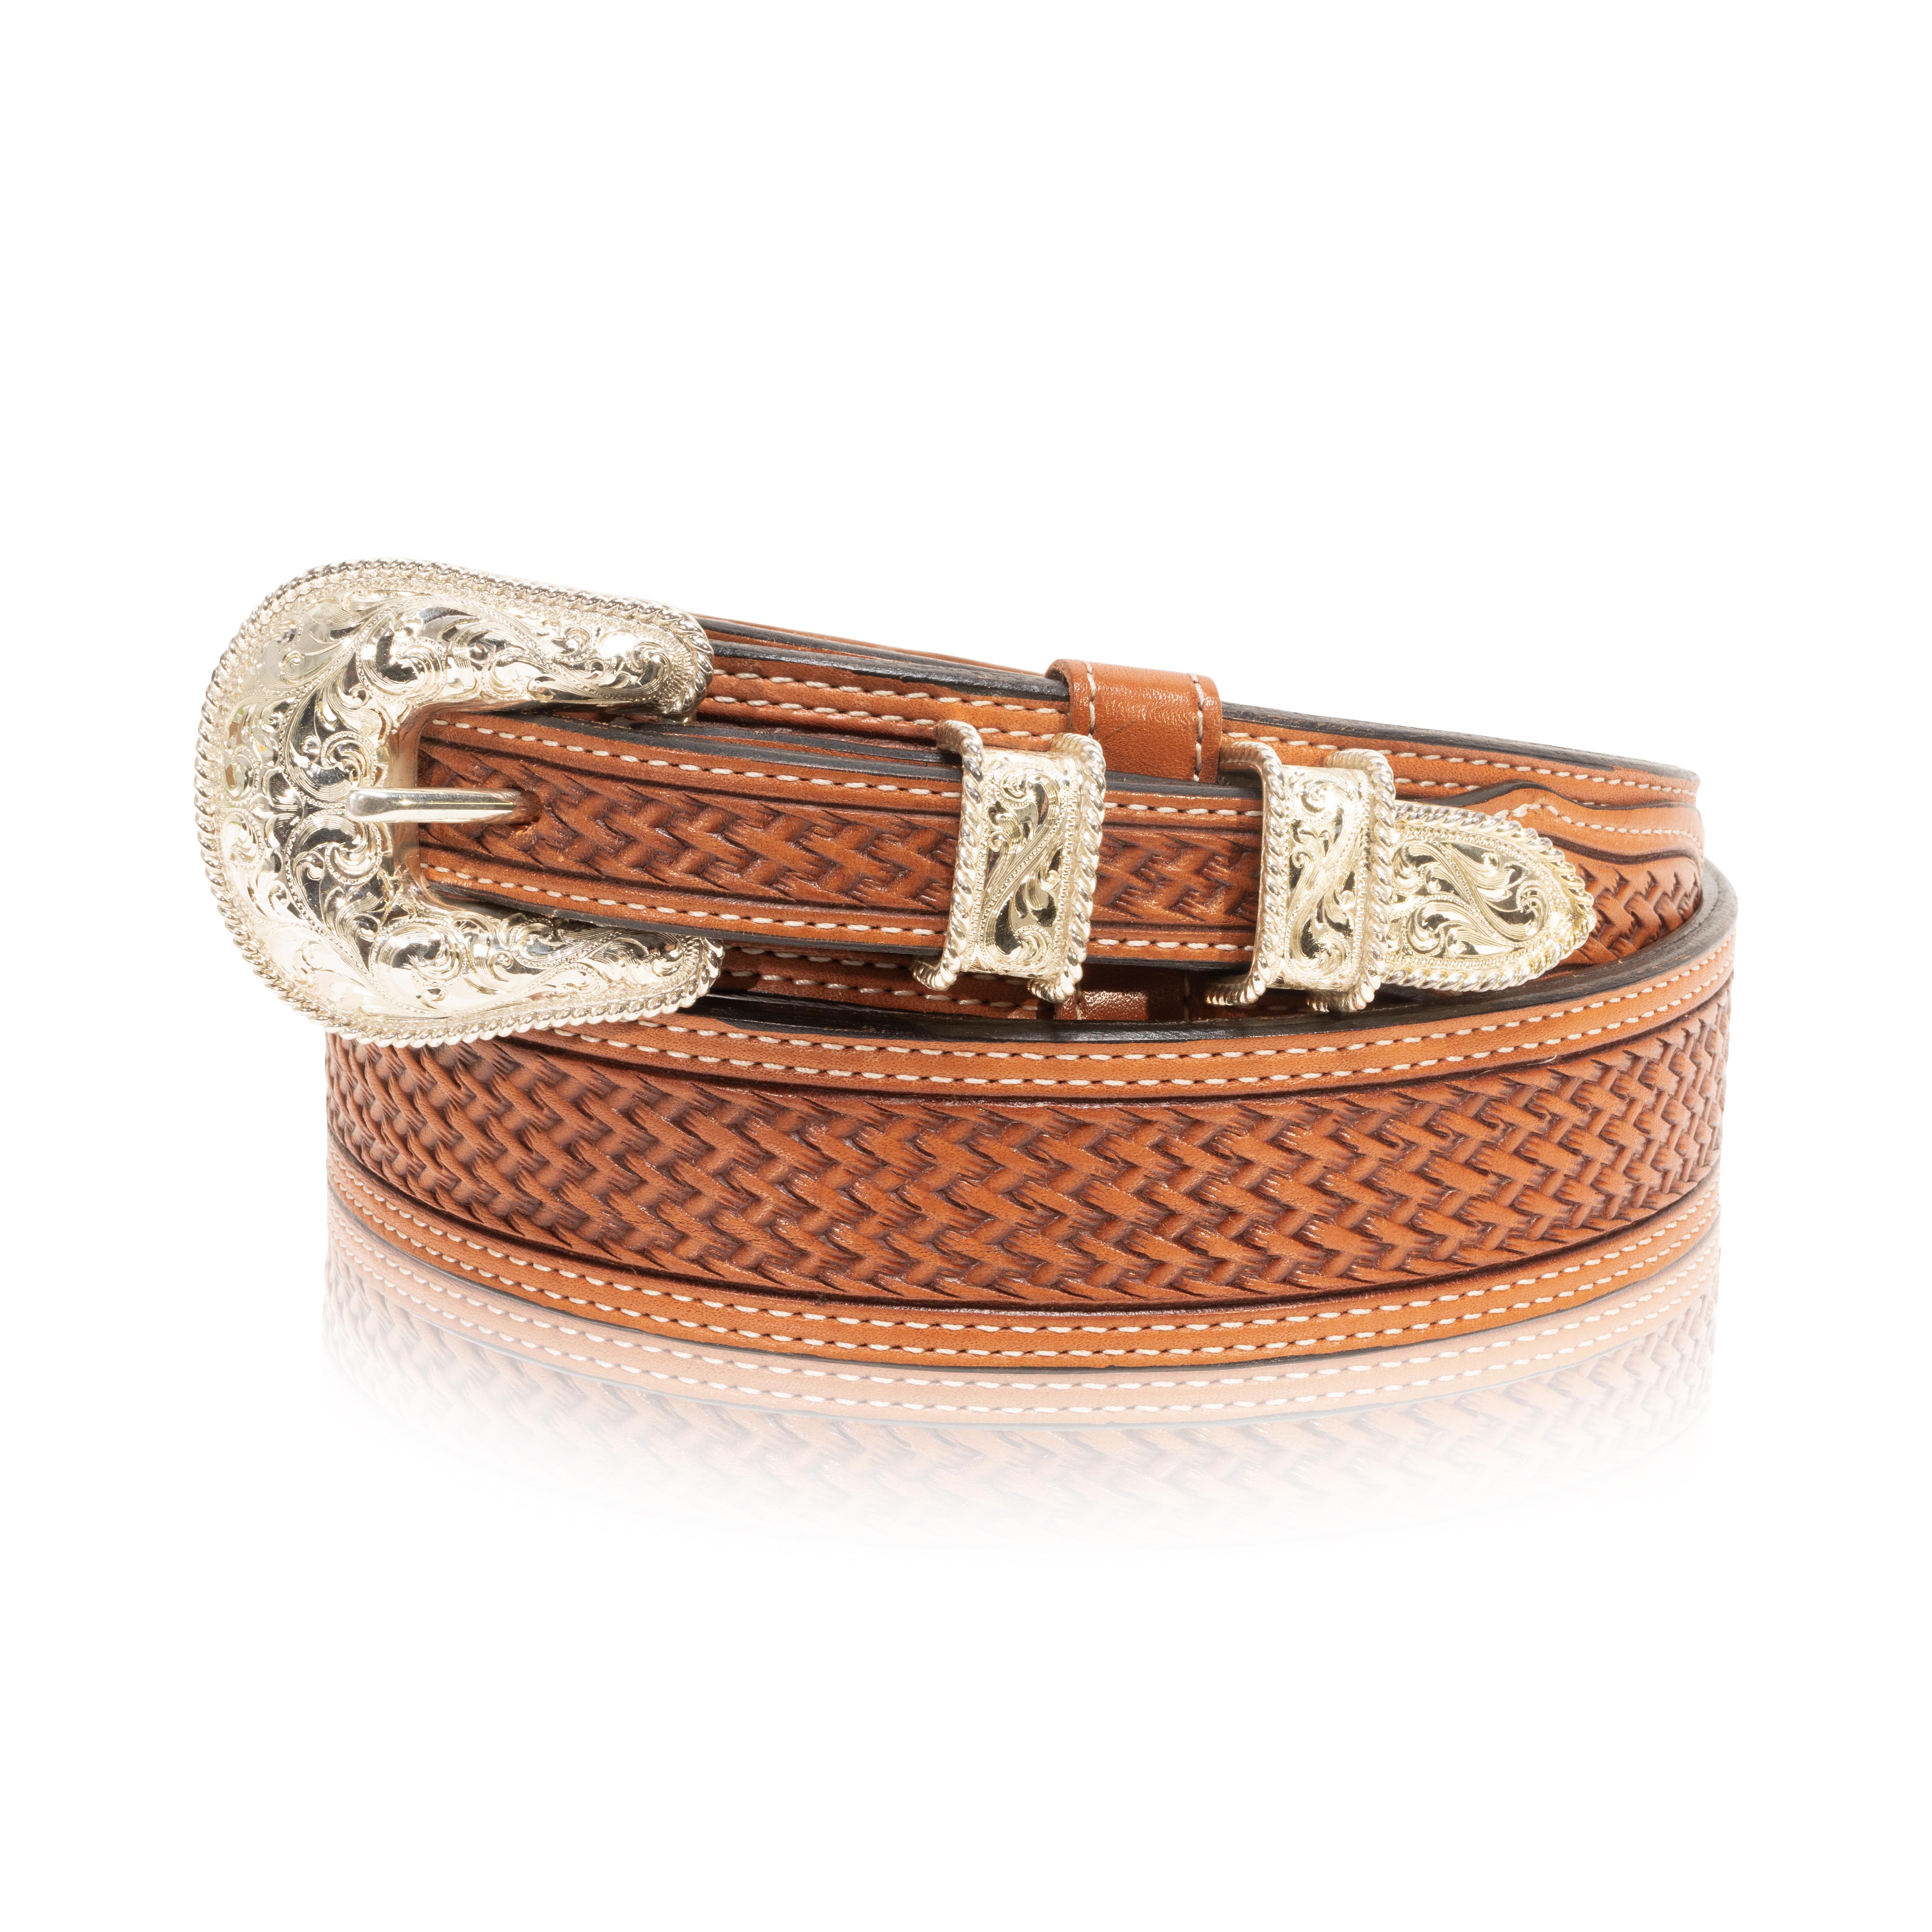 Orvis sterling buckle set on chocolate basket weave leather belt. Buckle features elborate scrolled silver work with rope border that is mirrored on loops and end piece. Stamped 